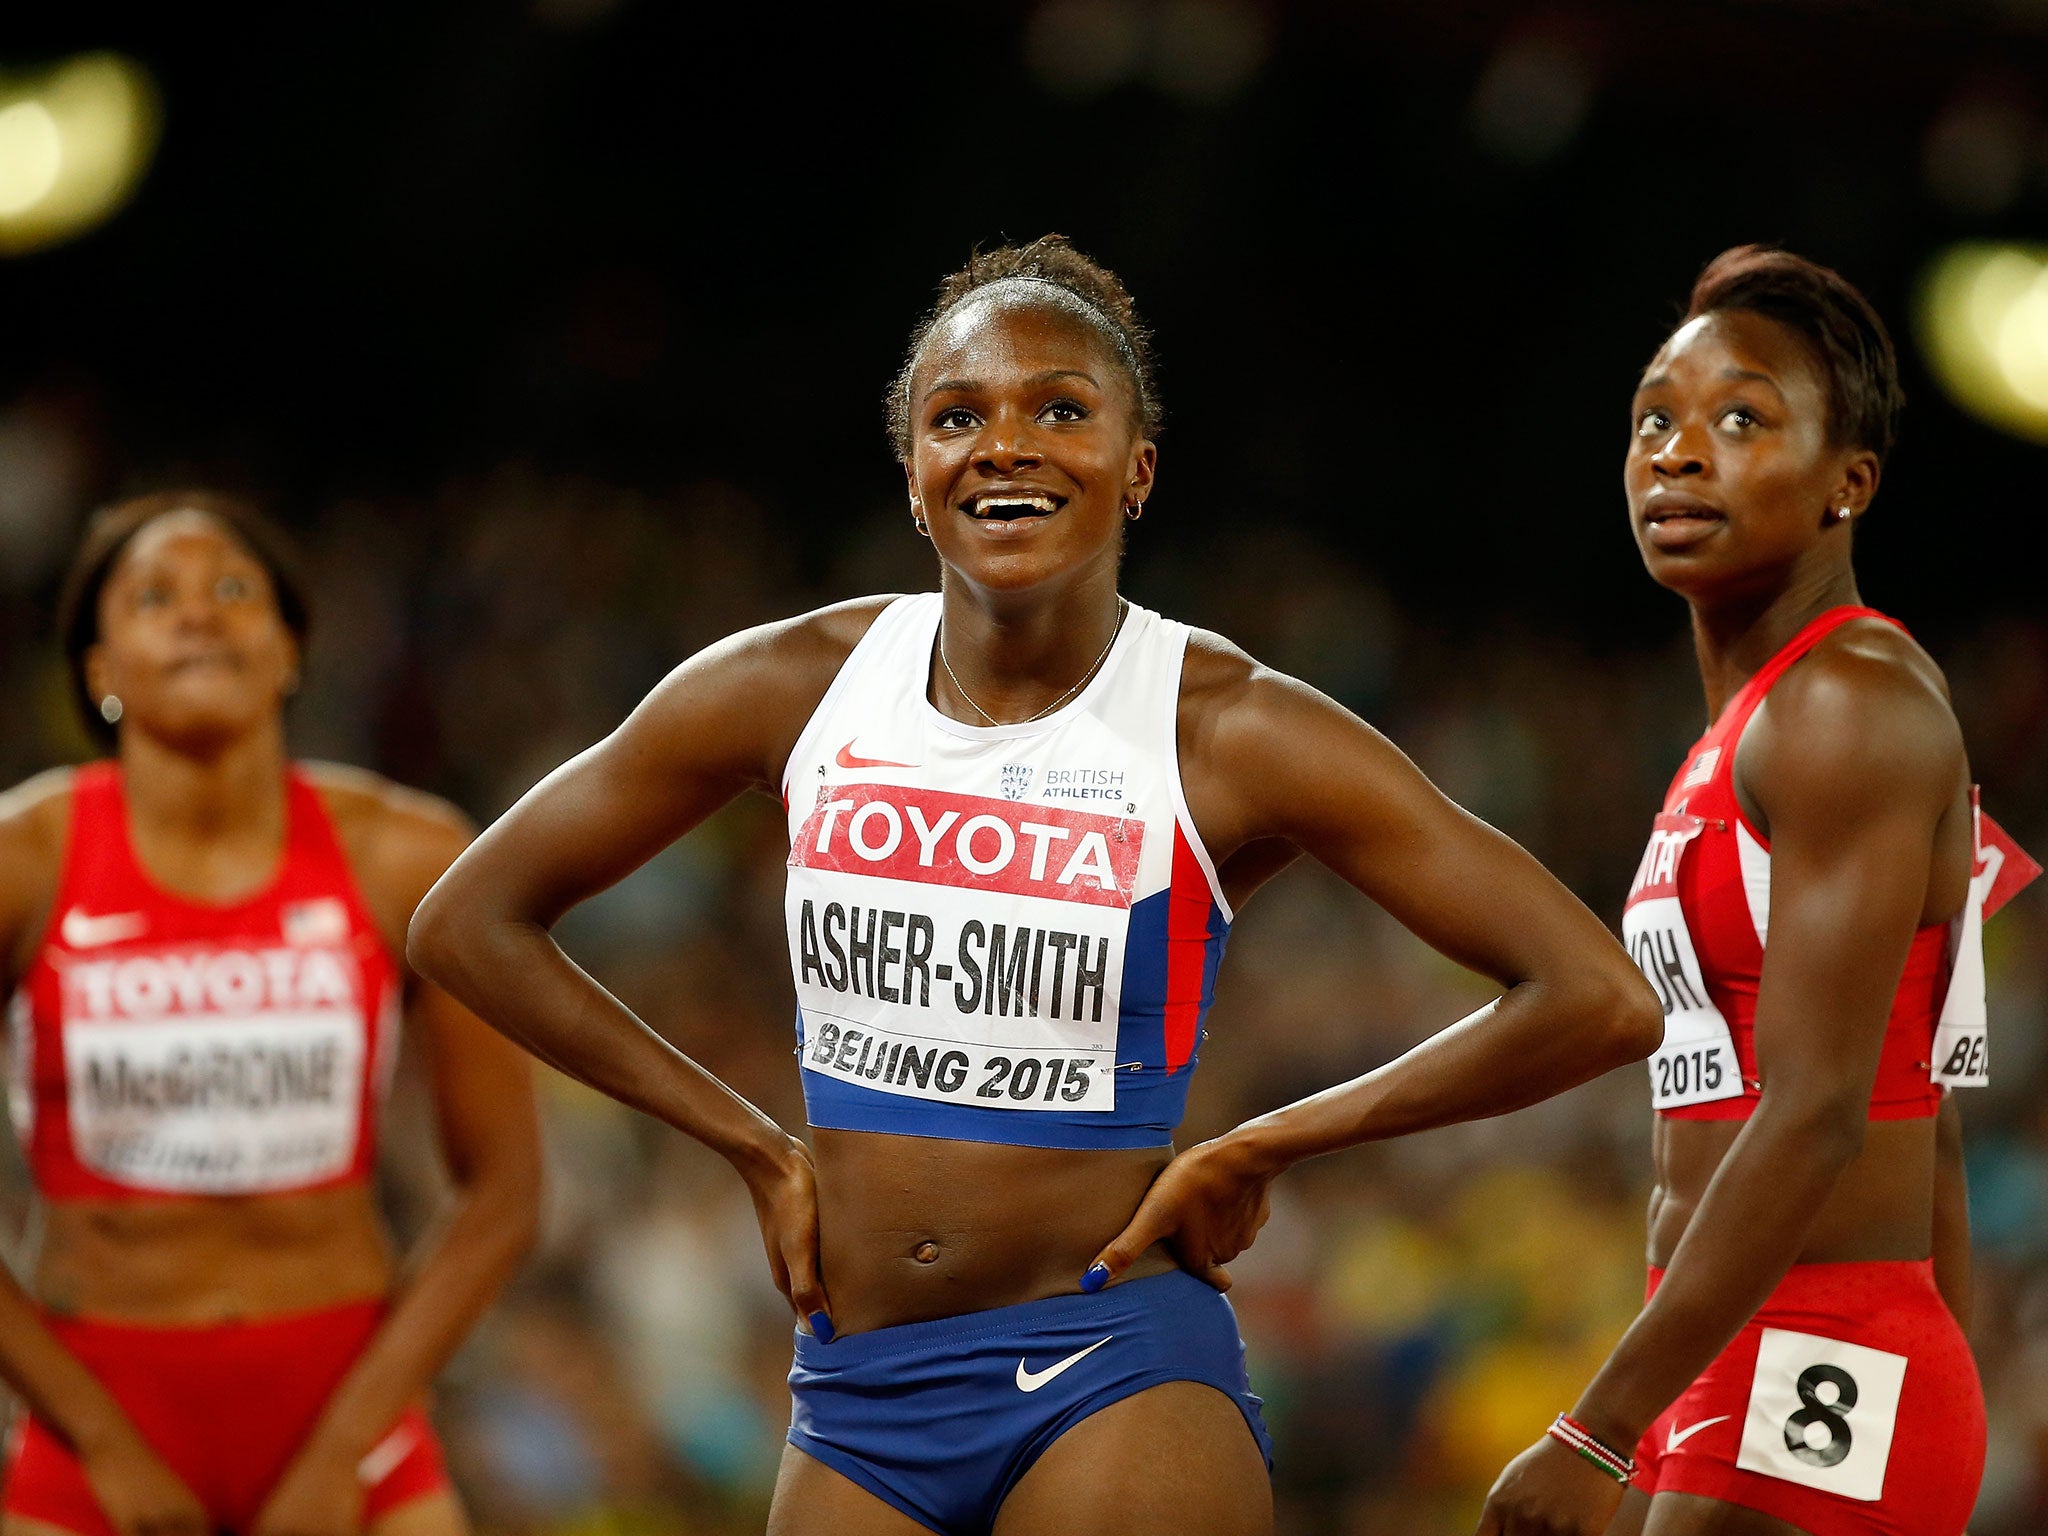 Dina Asher-Smith after the 200m final